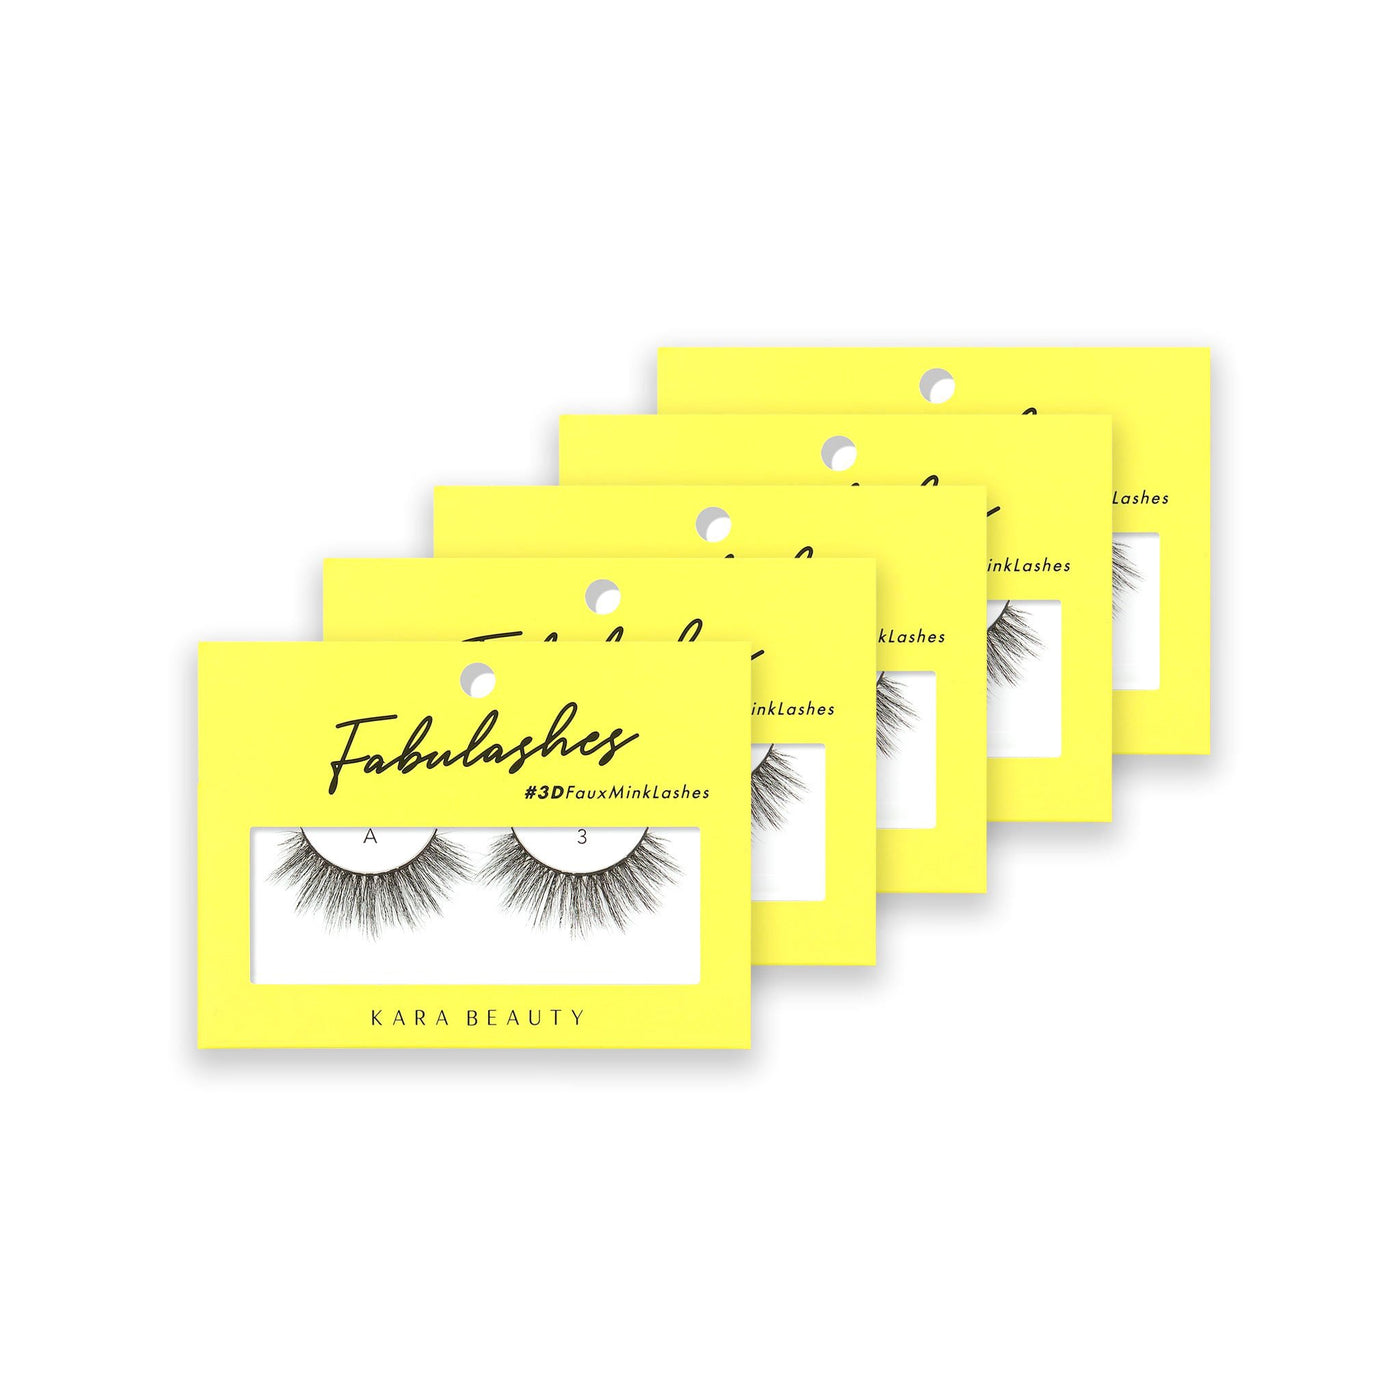 Style A3 3D Faux Mink Strip Eyelashes 5 pack